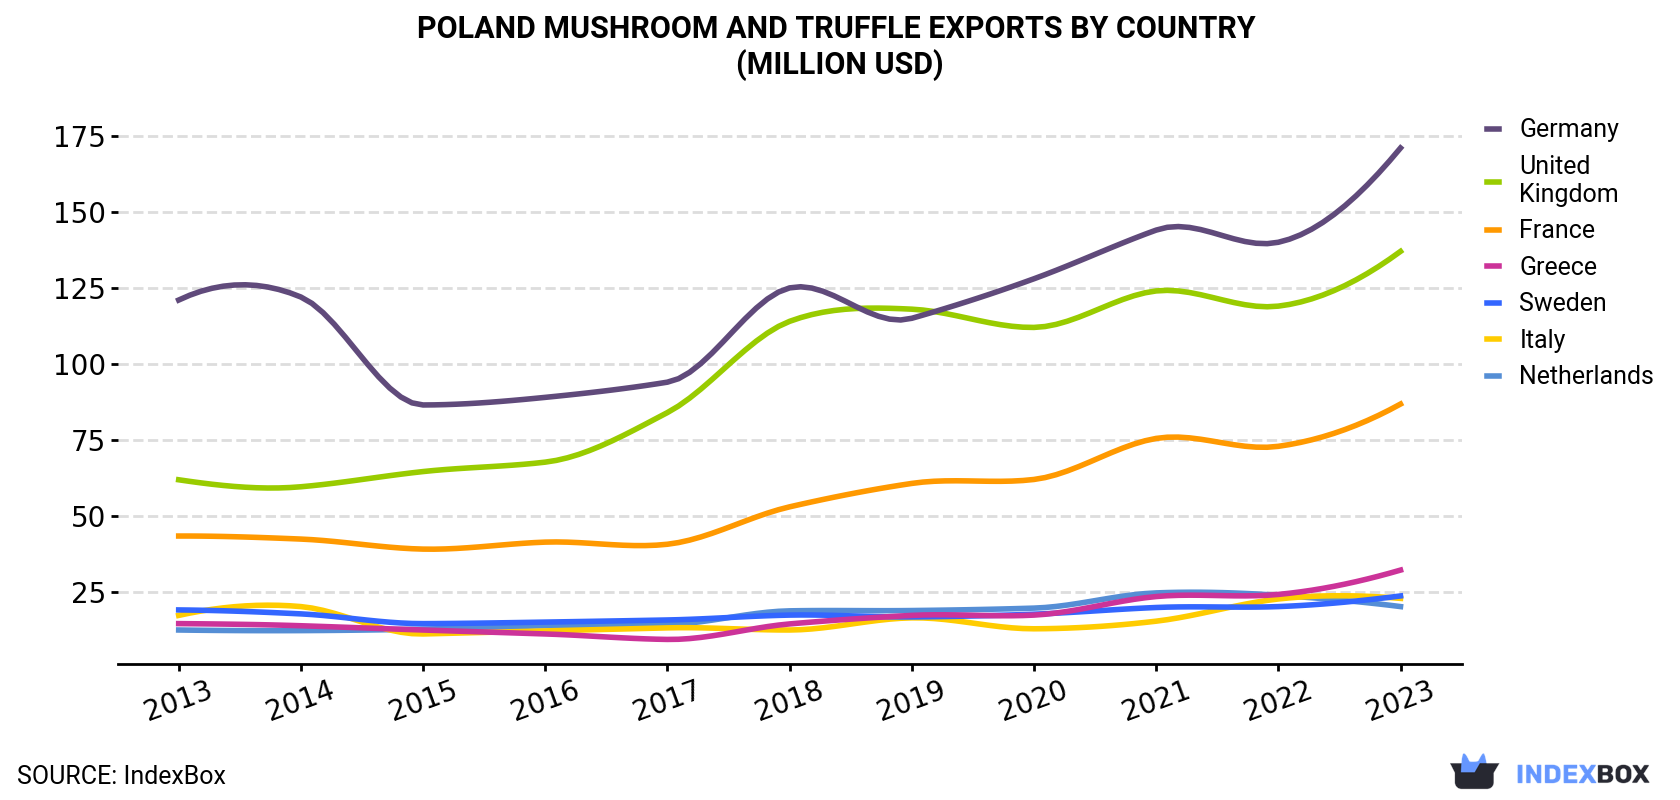 Poland Mushroom And Truffle Exports By Country (Million USD)